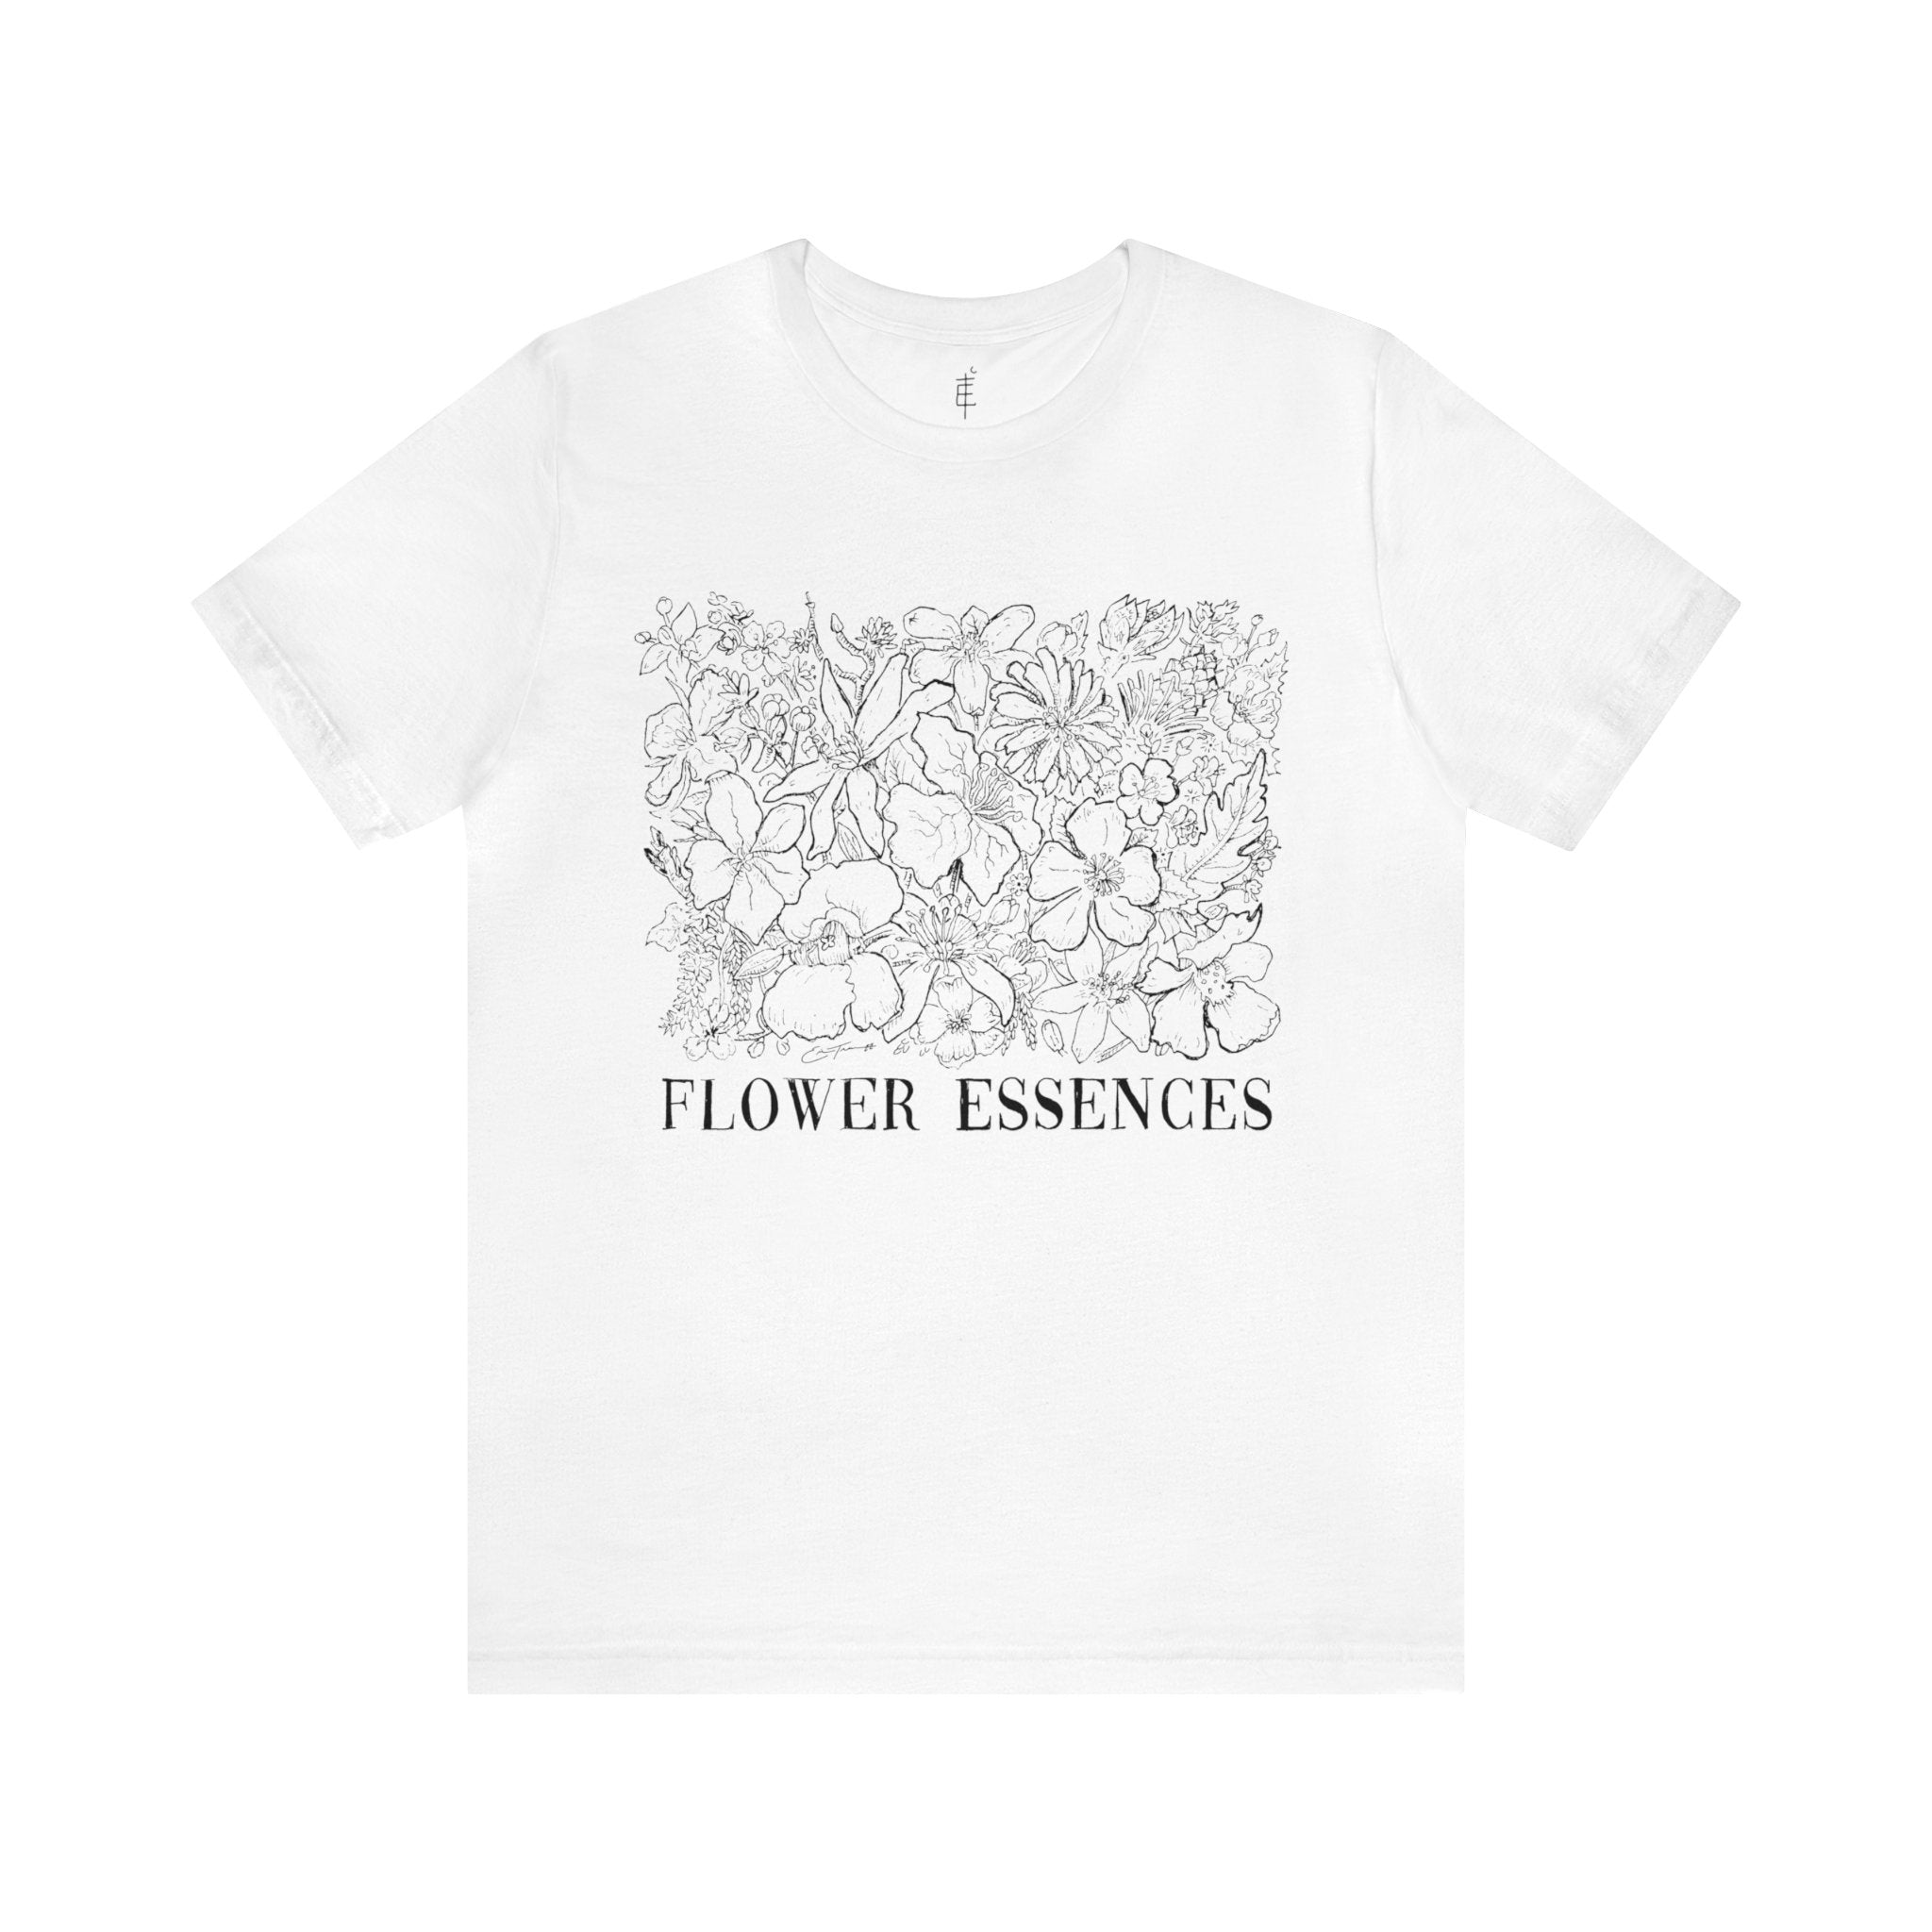 'Flower Essences' Tee by Eric Tecce